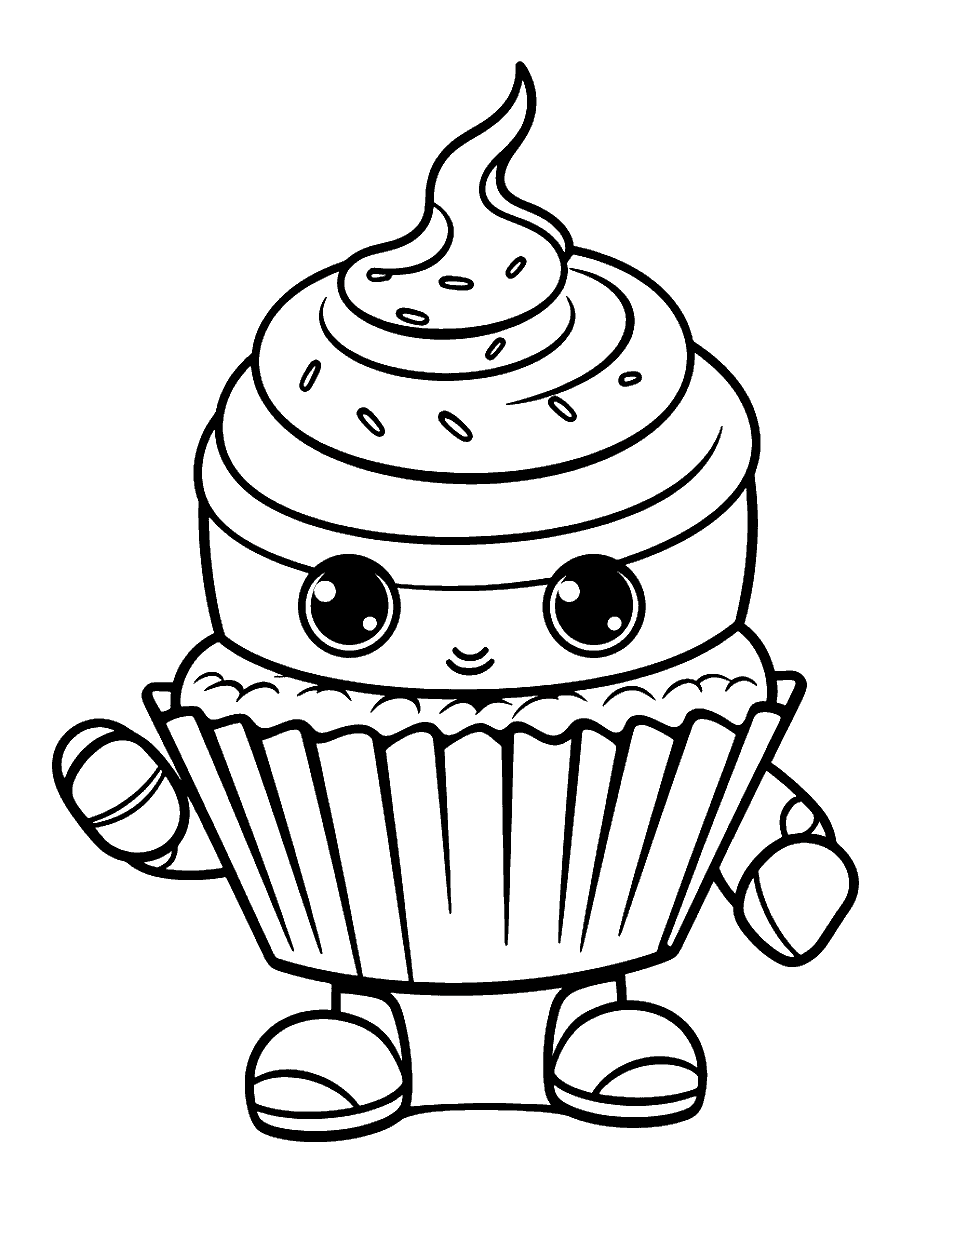 Robot Cupcake Coloring Page - A robot designed like a cupcake for a bakery shop.